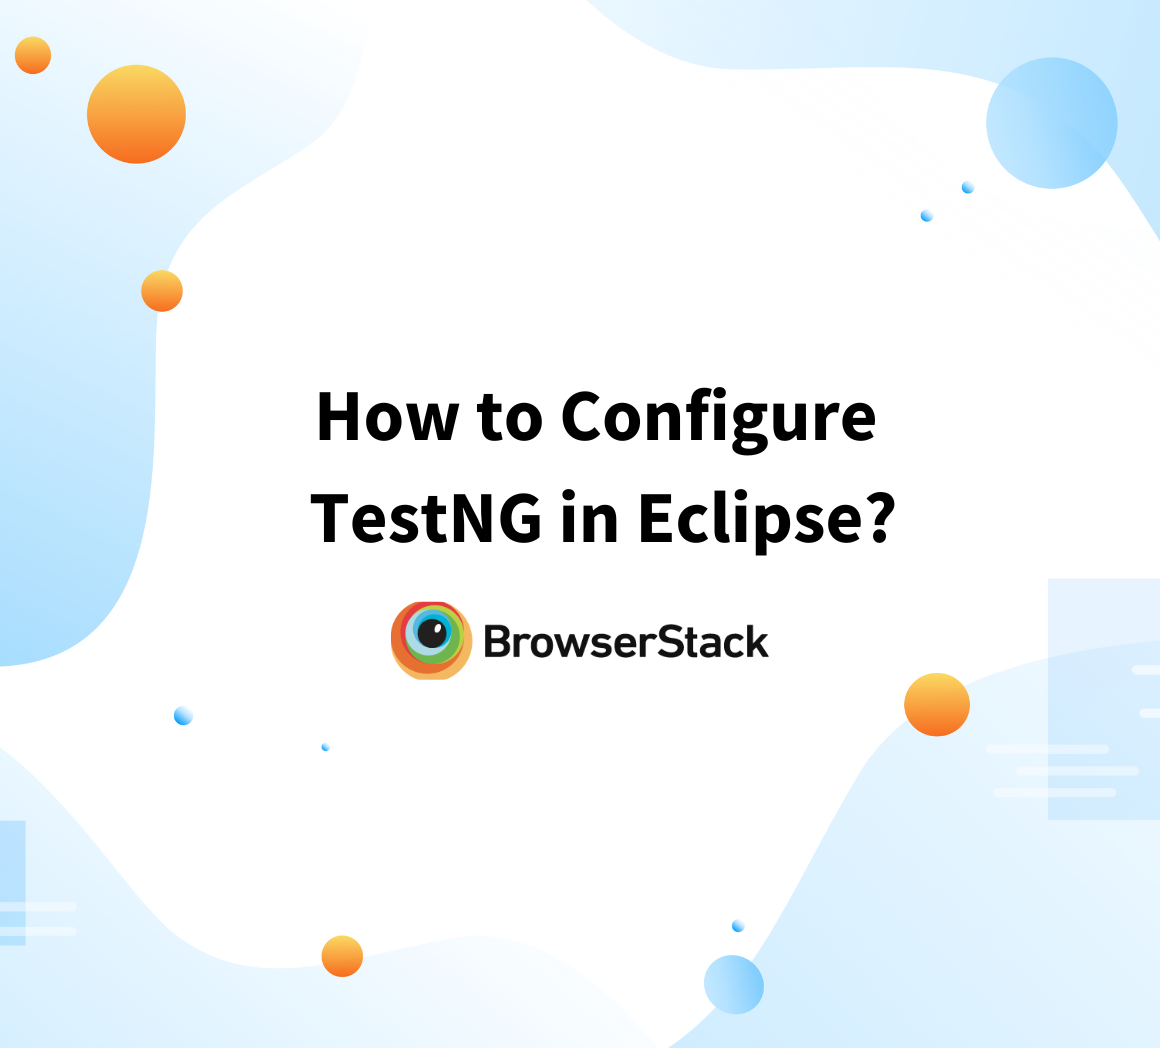 How to Install and Add TestNG in Eclipse